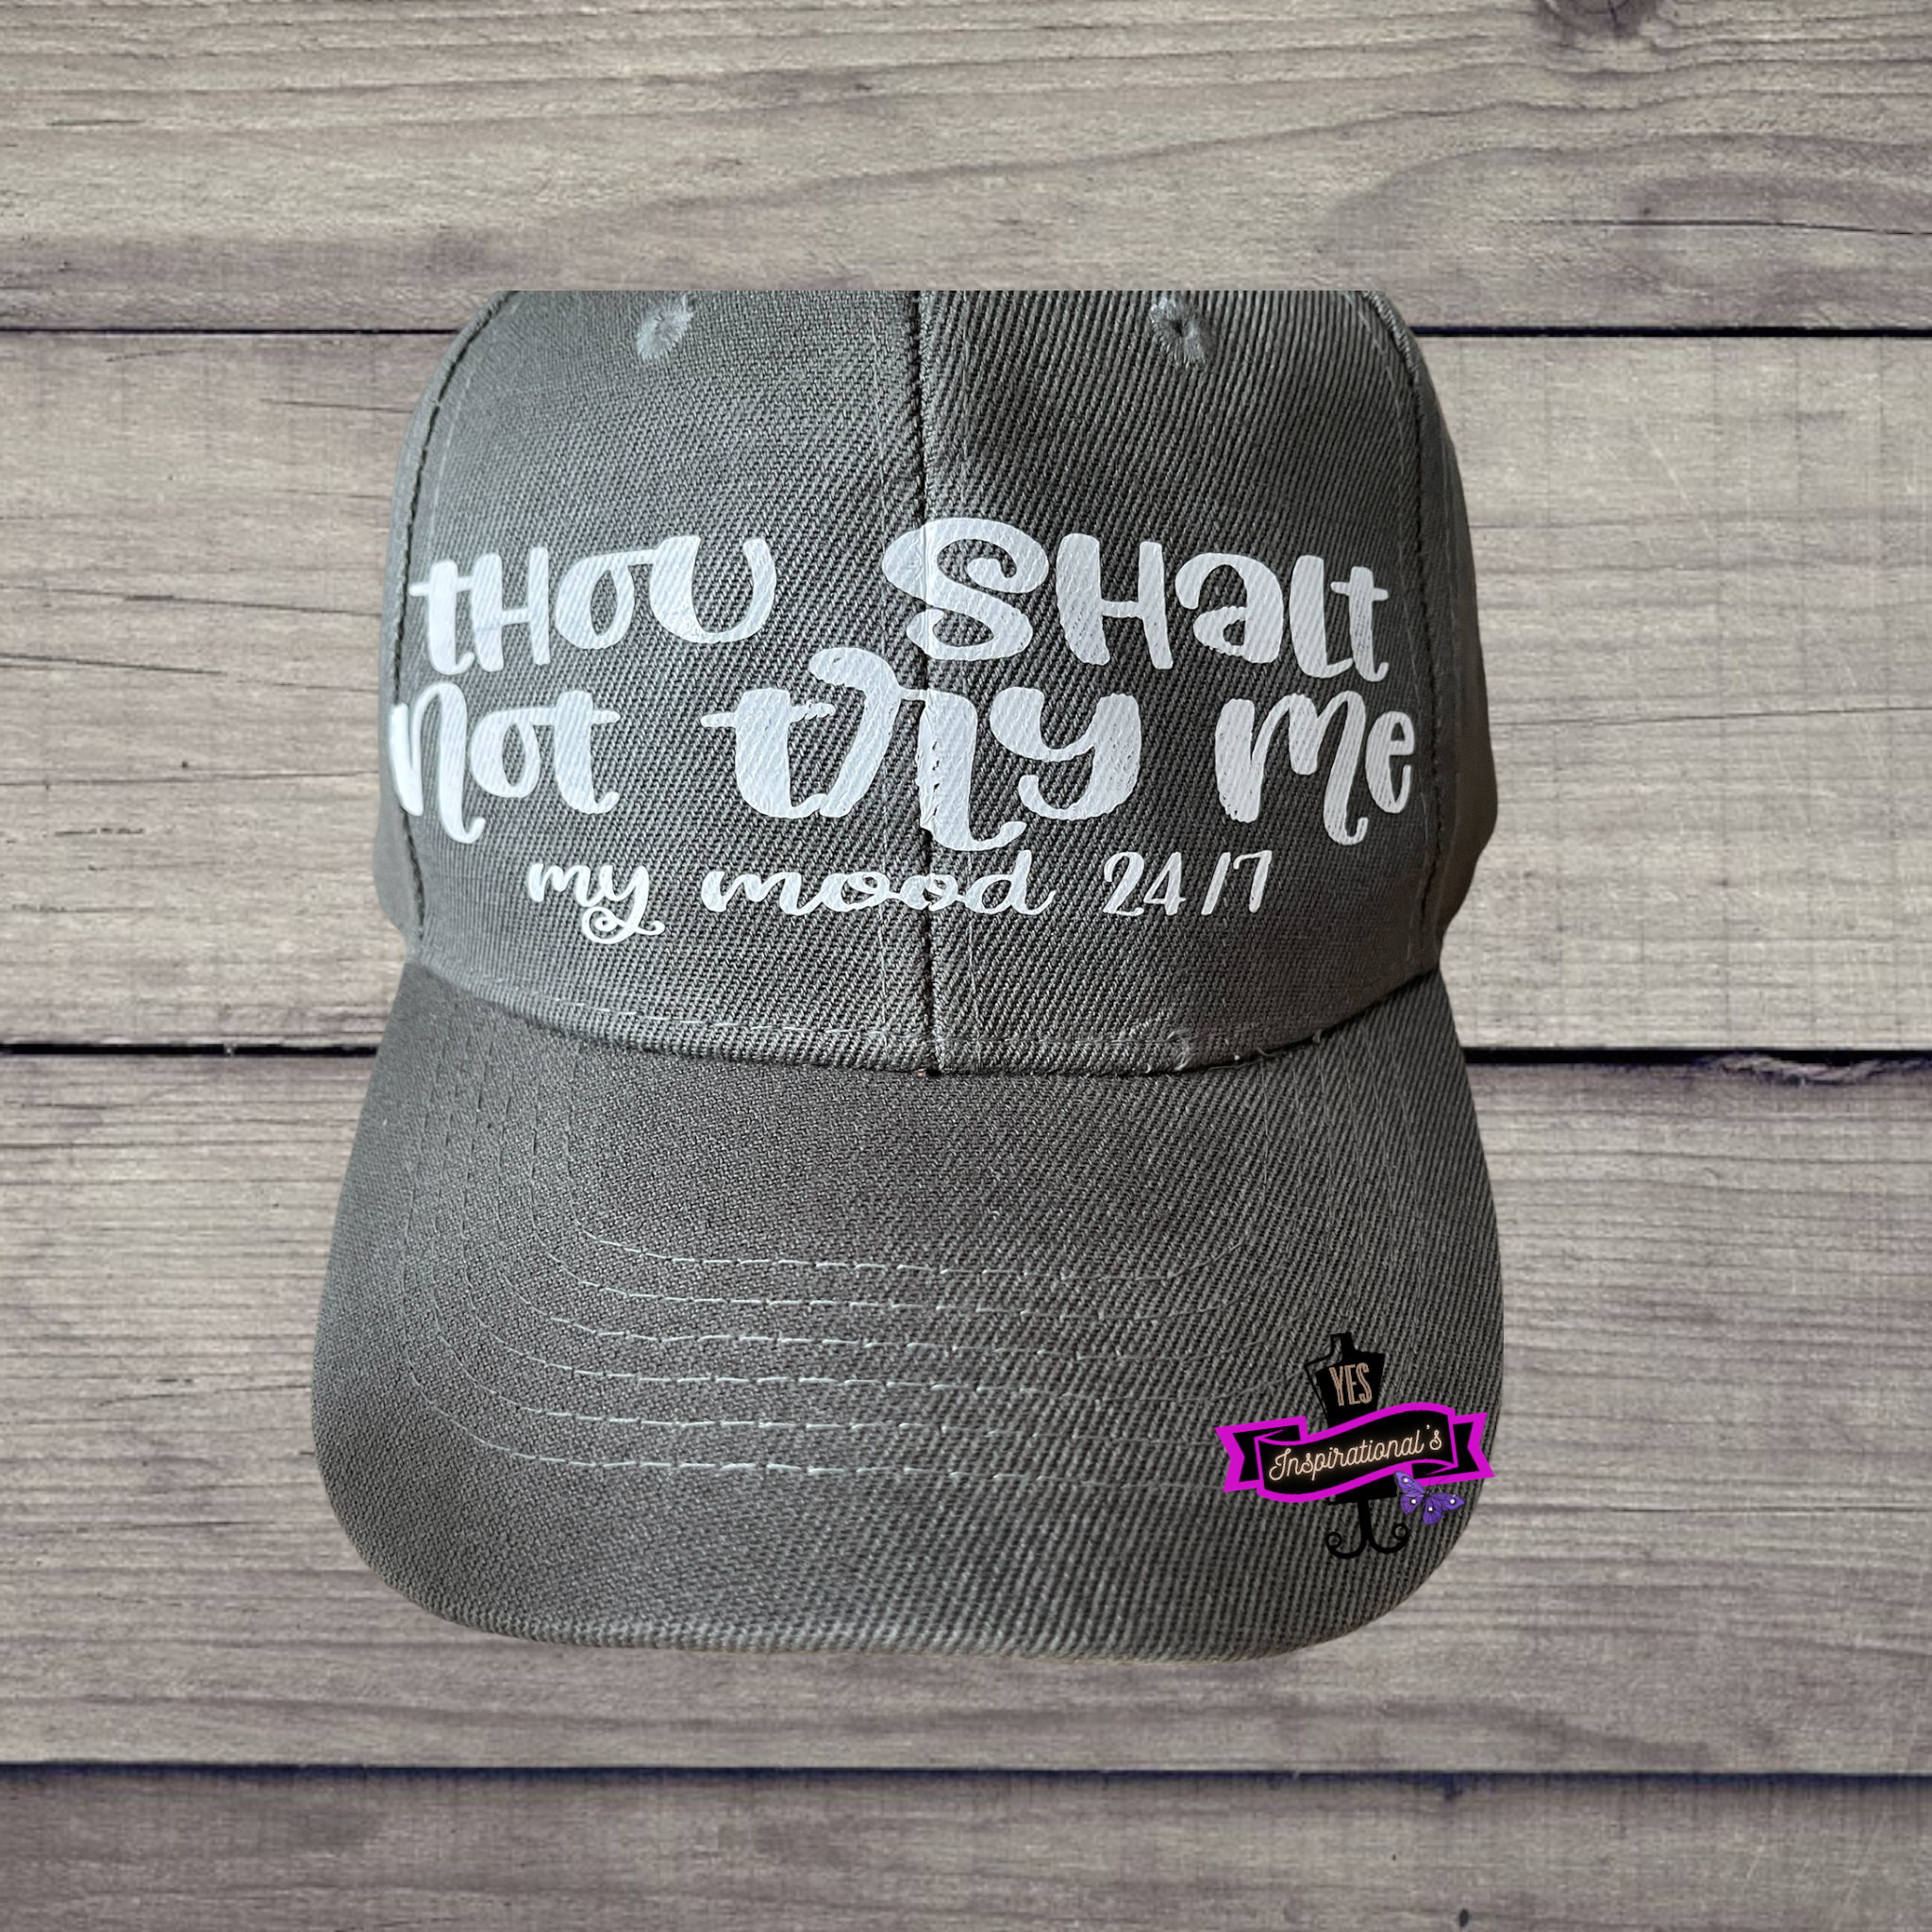 Thou Shall Not Hat